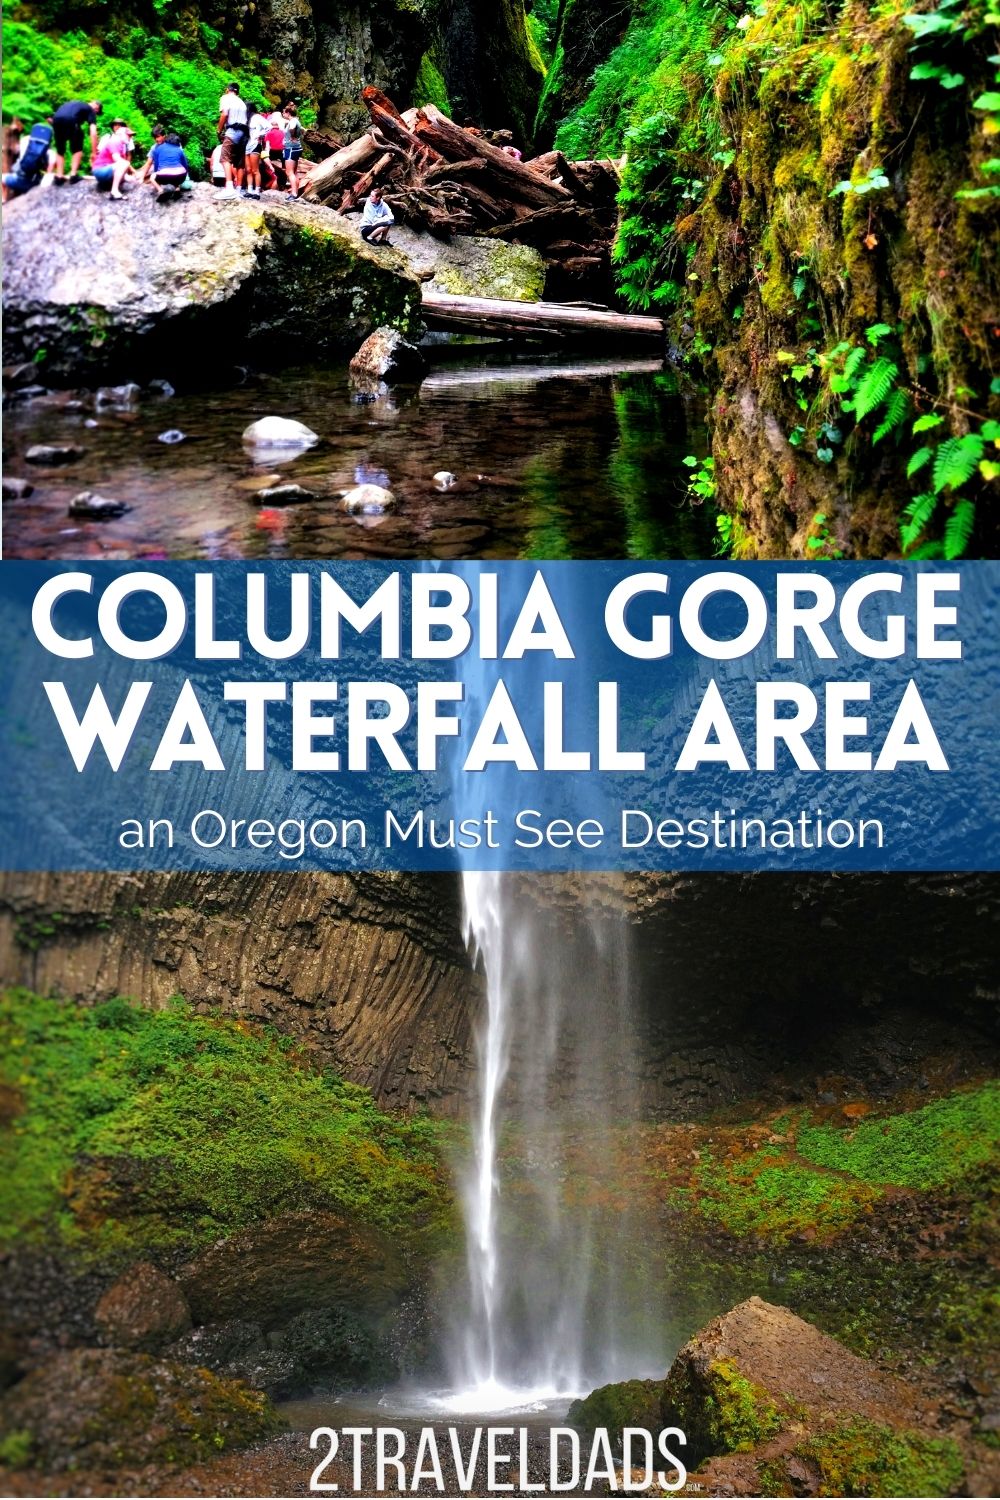 Details of how to explore the Columbia Gorge Waterfall Area on a road trip from Portland. Visiting waterfalls, Hood River and more is an ideal weekend plan and one of the best things to do in Oregon.